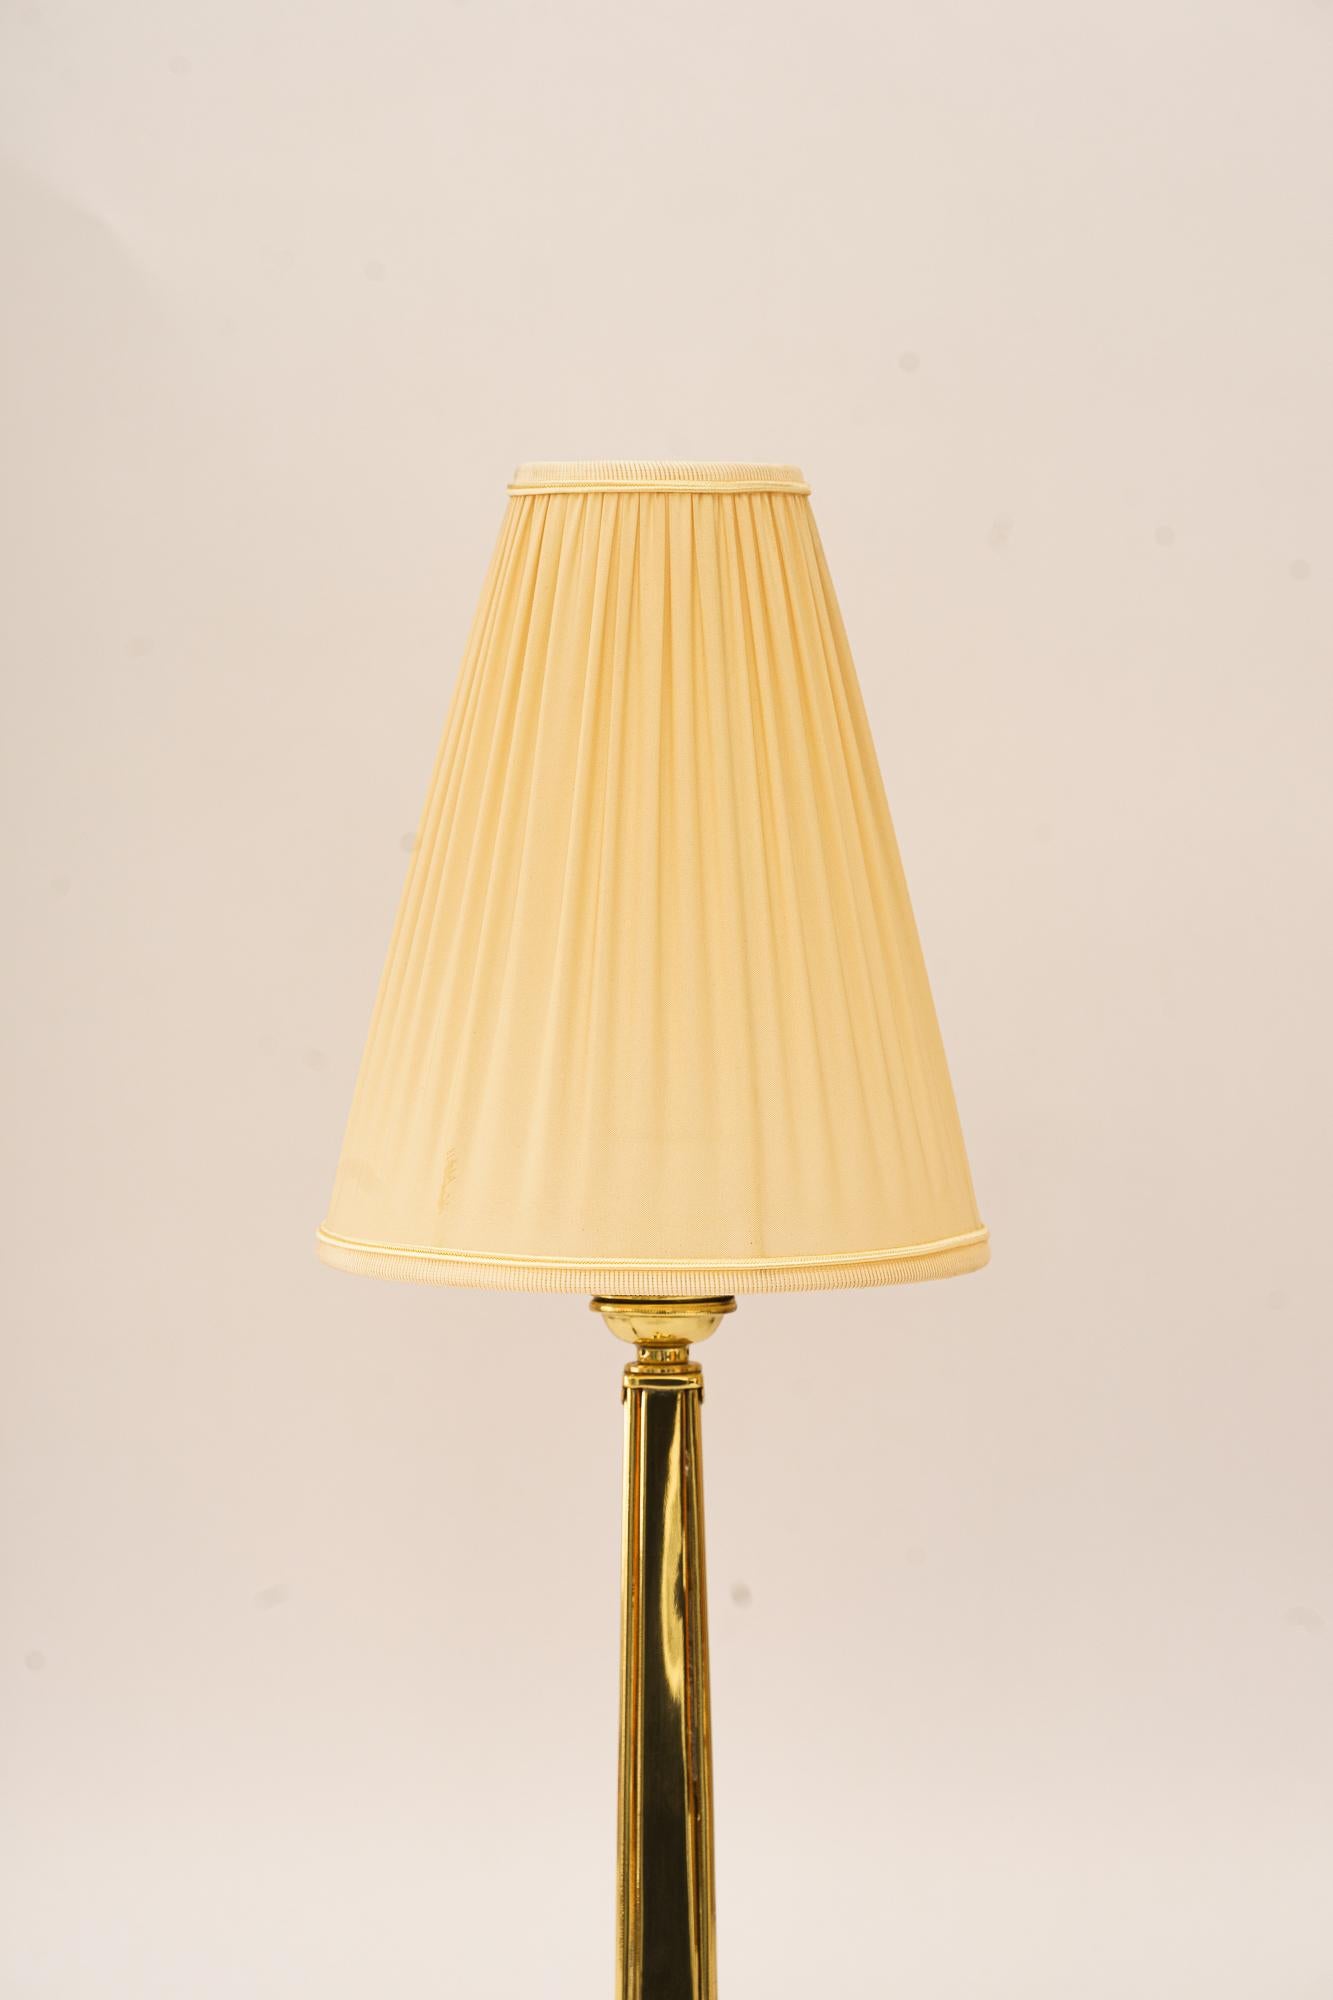 Art Deco Table lamp with fabric shade vienna around 1920s
Brass polished and stove enameled
The fabric shade is replaced ( new )
